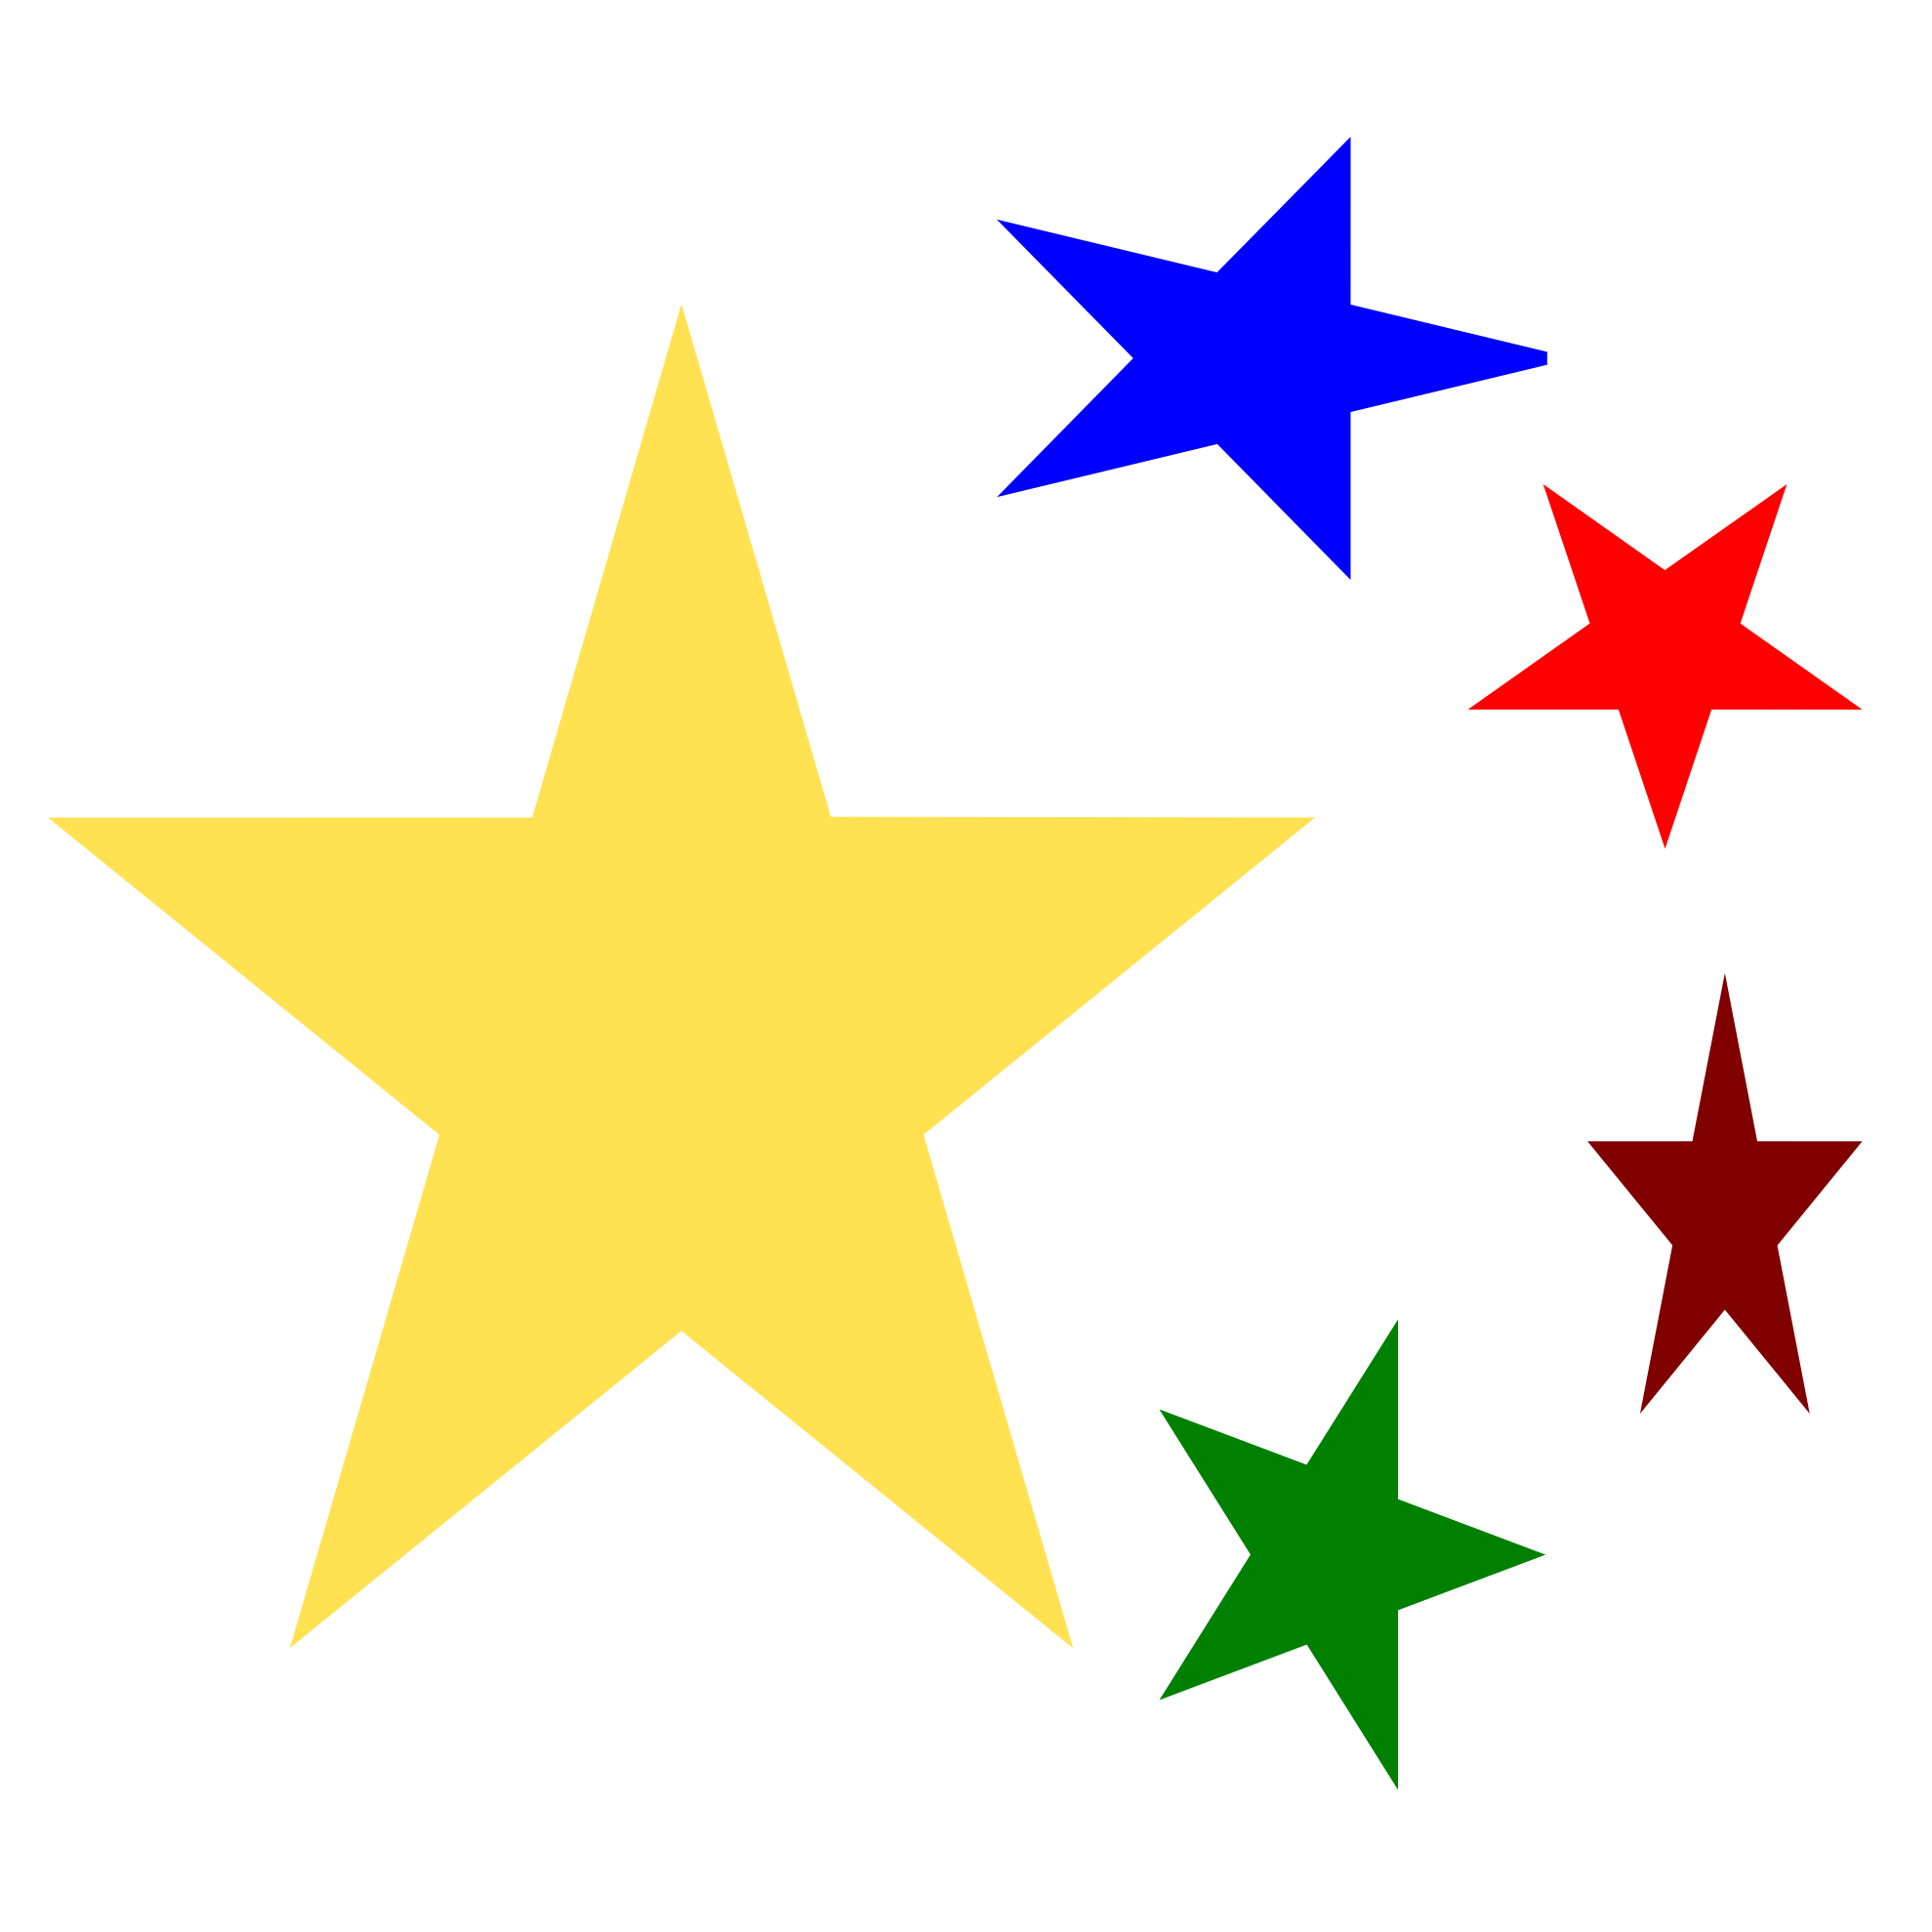 Christmas Star Clip Art - Free Clipart Images